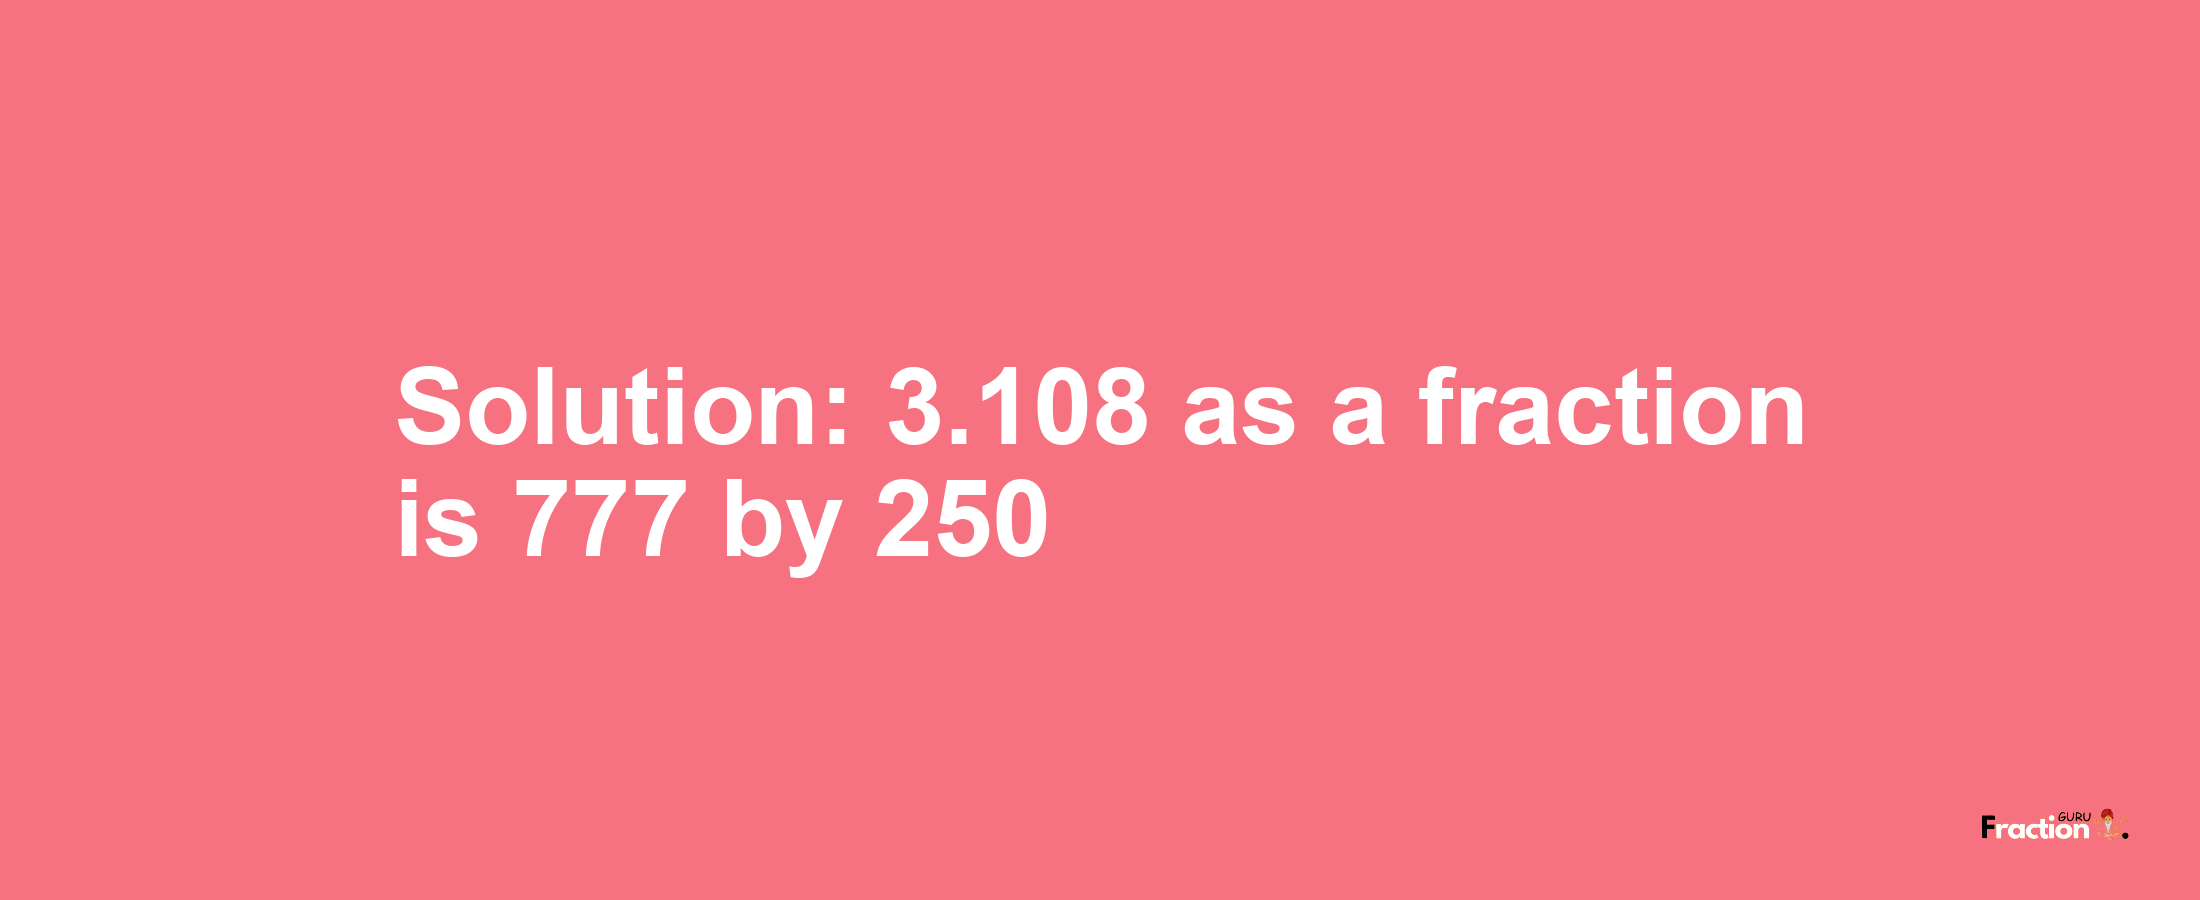 Solution:3.108 as a fraction is 777/250